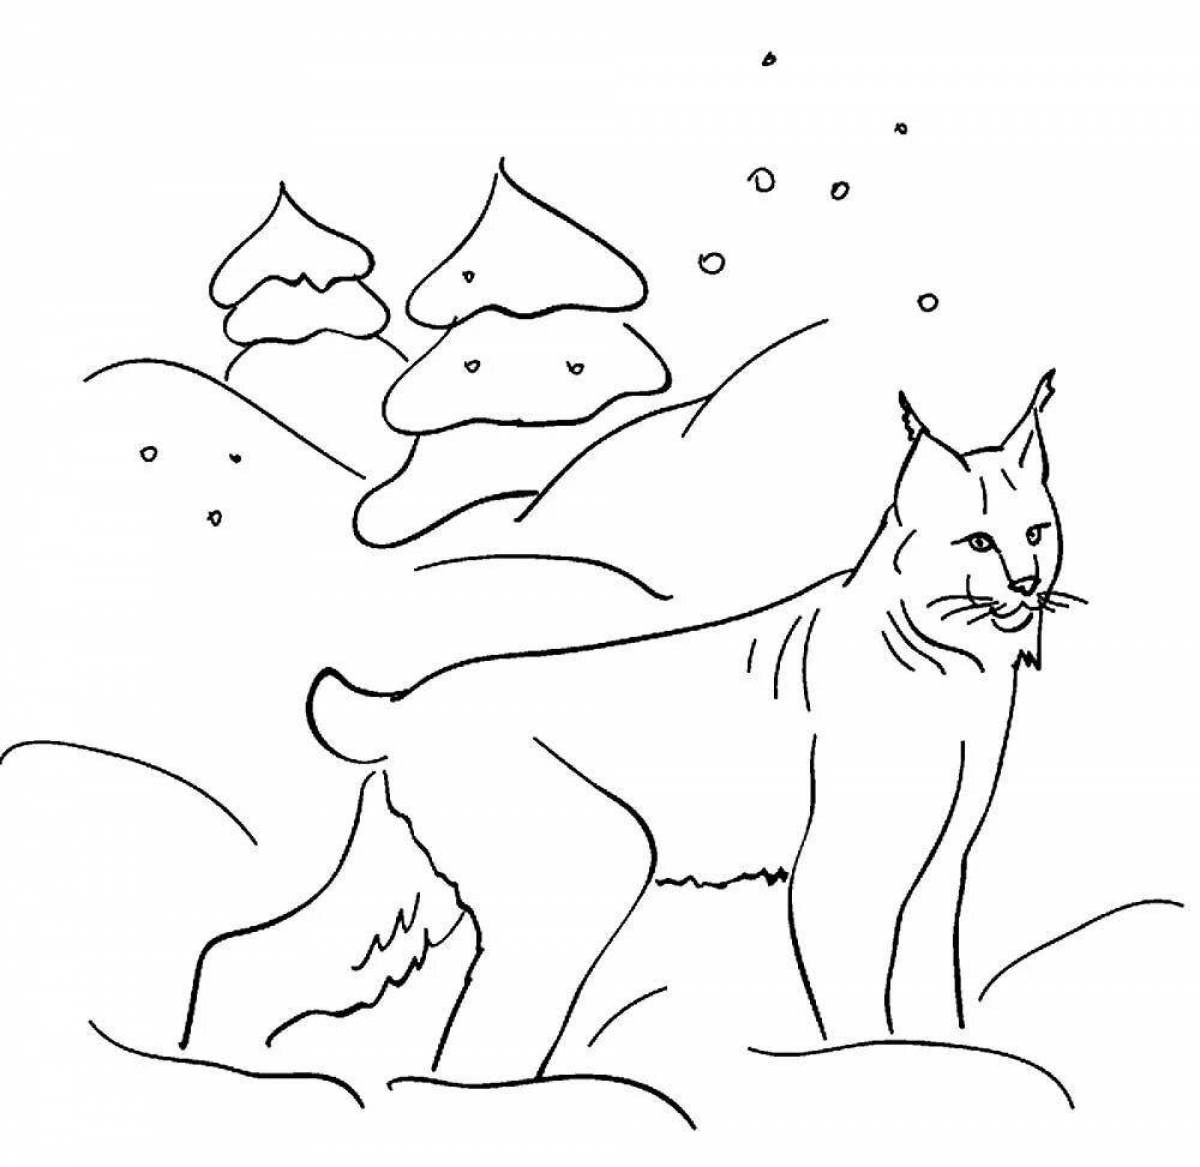 Funny winter animals coloring pages for kids